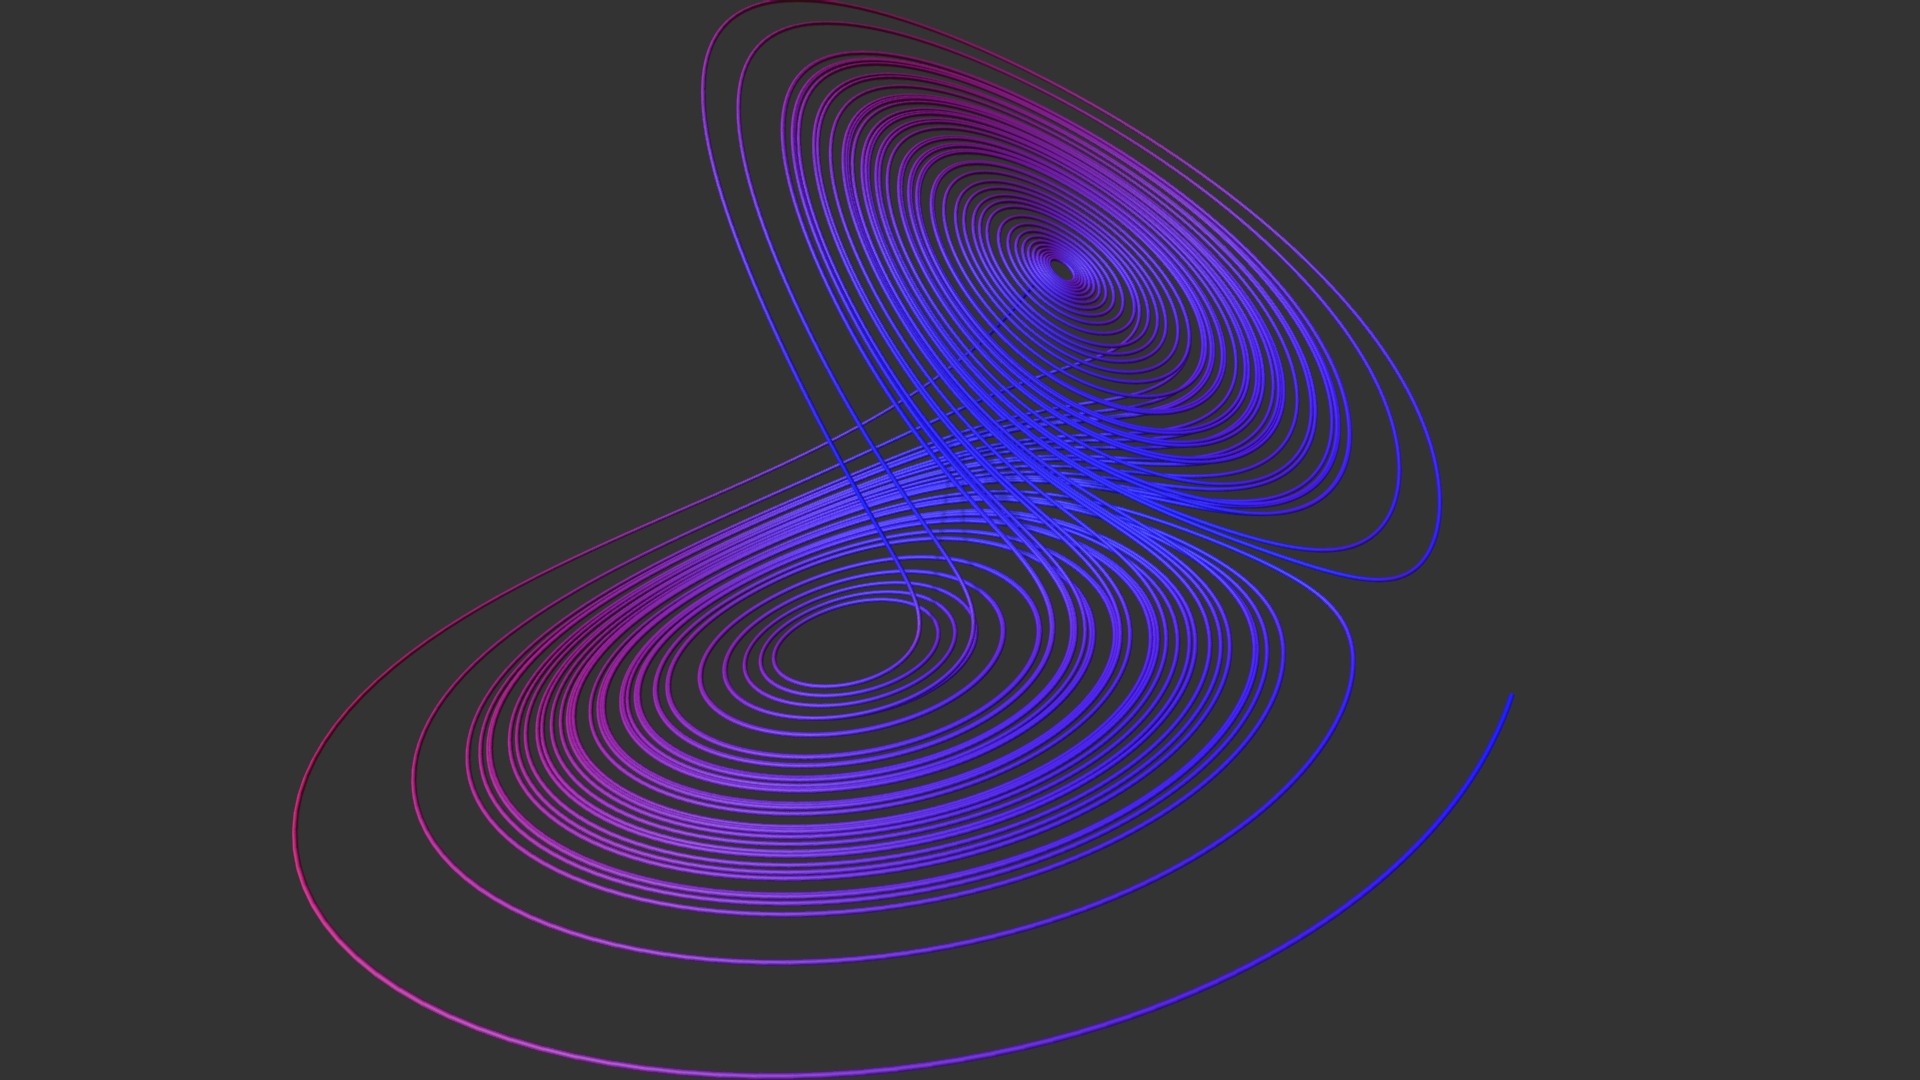 3D model Lorenz attractor - This is a 3D model of the Lorenz attractor. The 3D model is about background pattern.